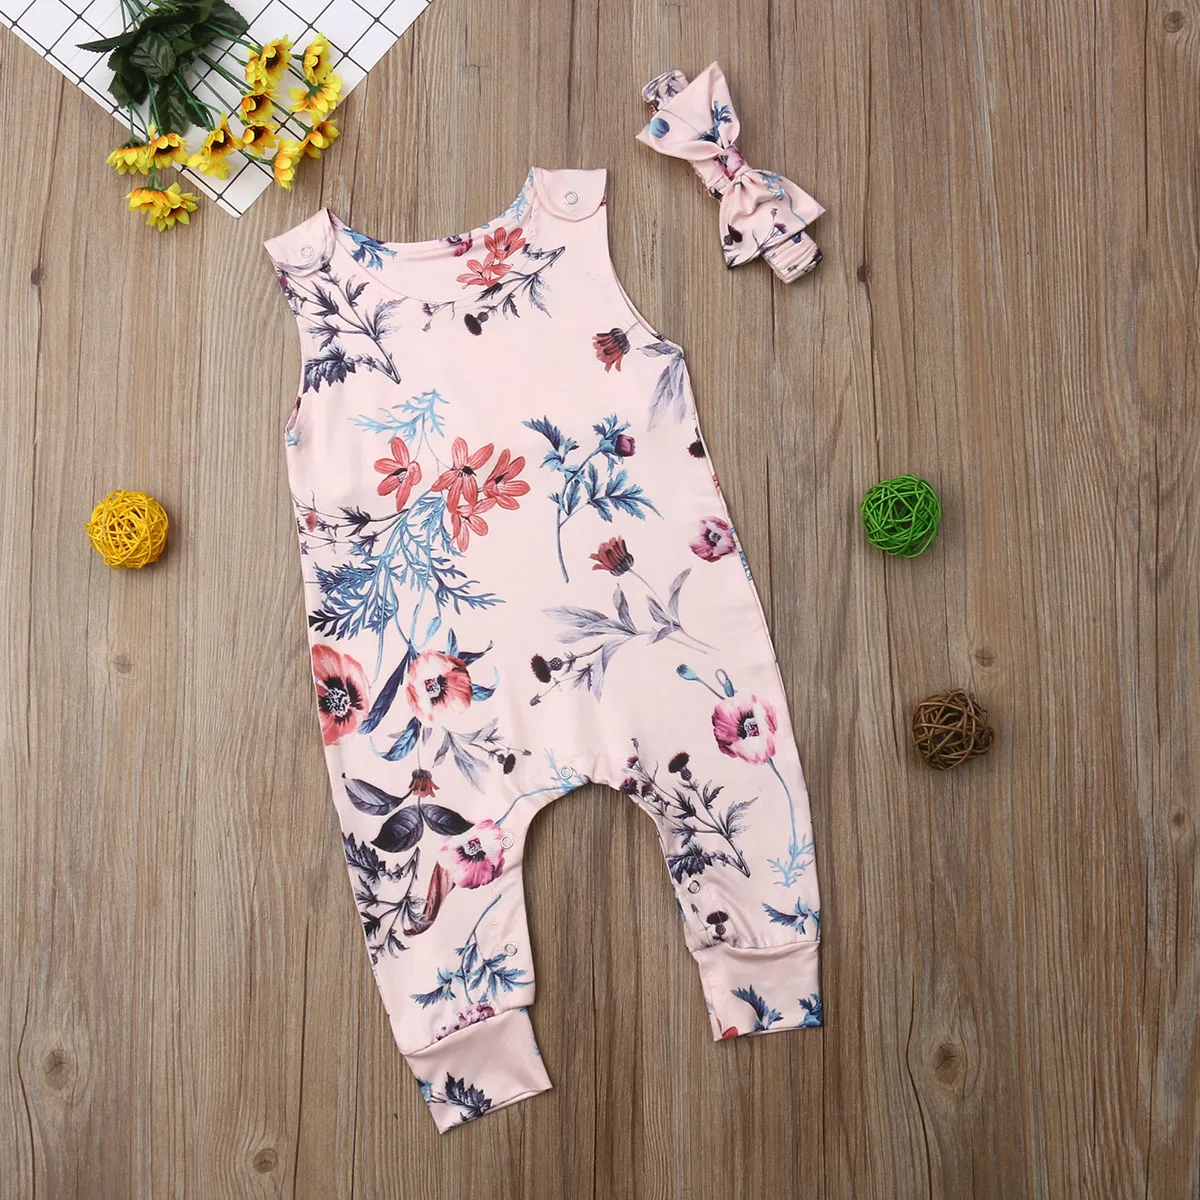 

Pudcoco Girl Jumpsuits 0-24M Fashion Infant Newborn Baby Girls Cotton Romper Sunsuit Playsuit Headband Outfit